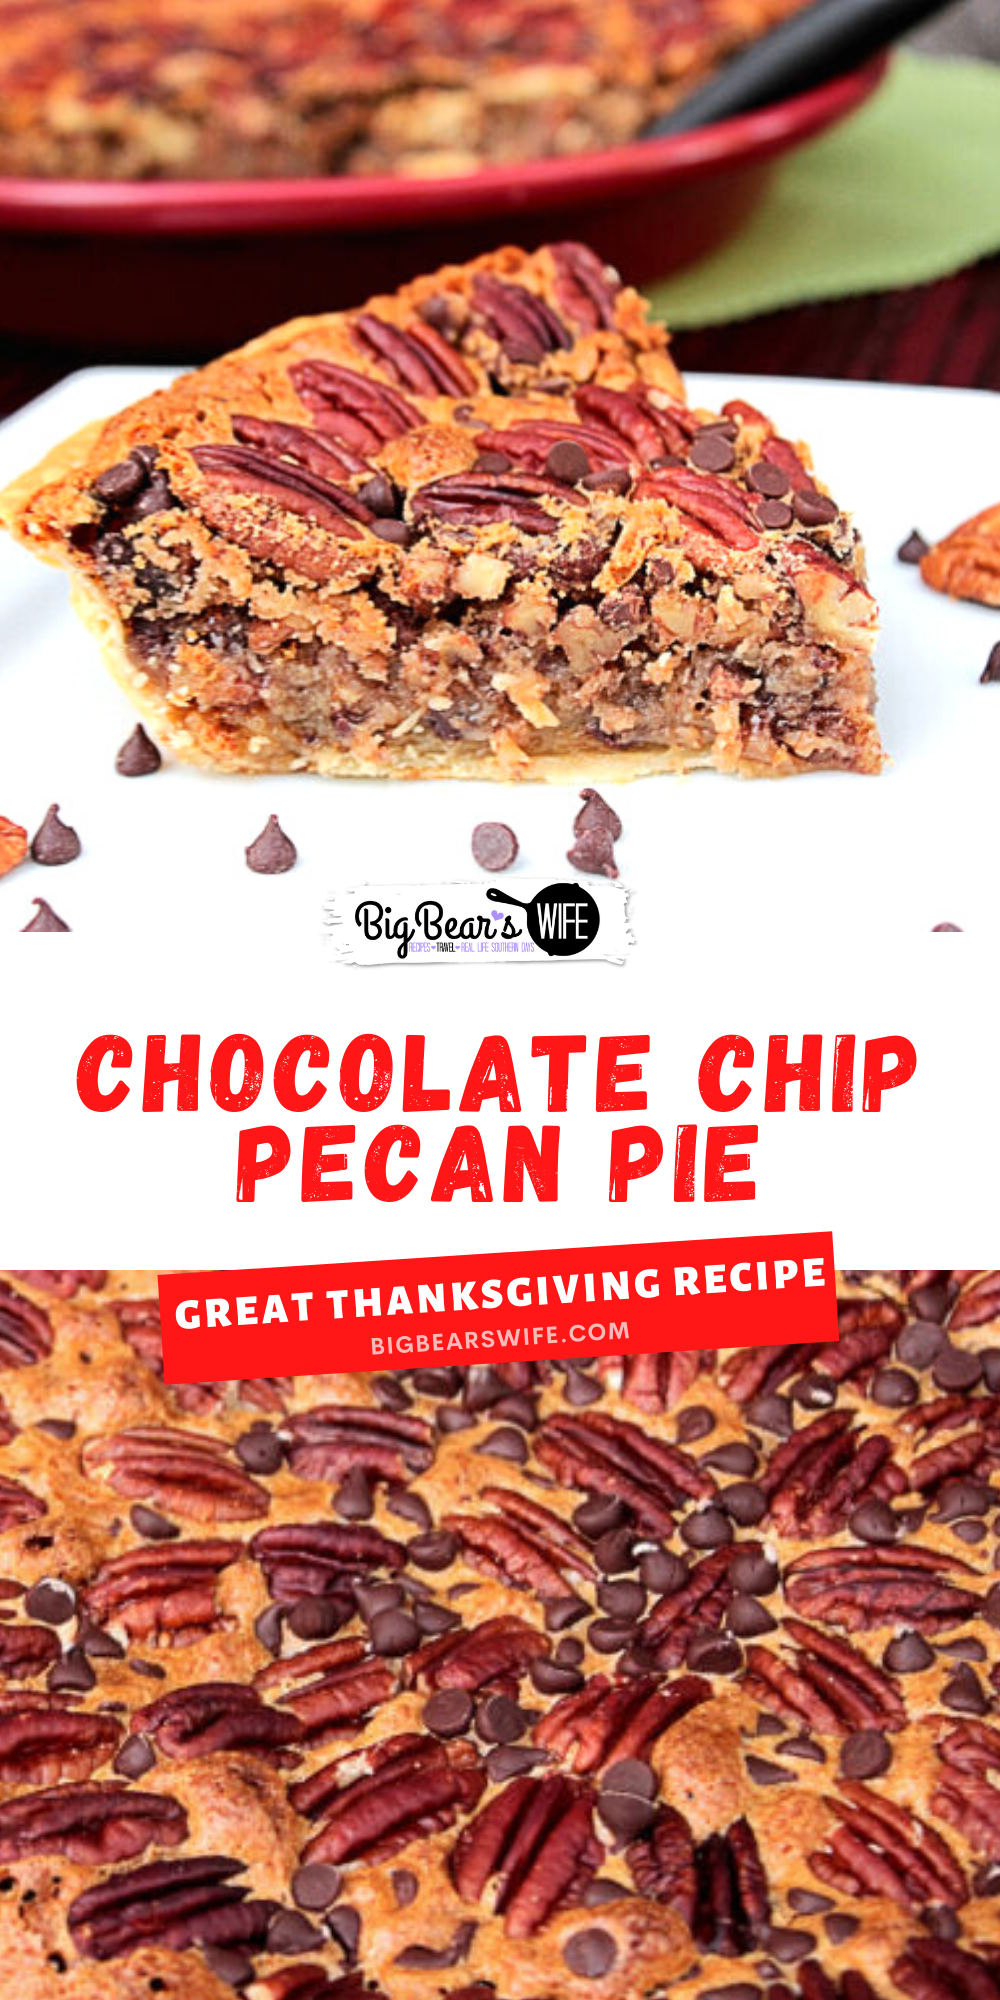 This Chocolate Chip Pecan Pie is a southern pecan pie that's been filled with mini chocolate chips! It's one of the best pies I've made!  via @bigbearswife